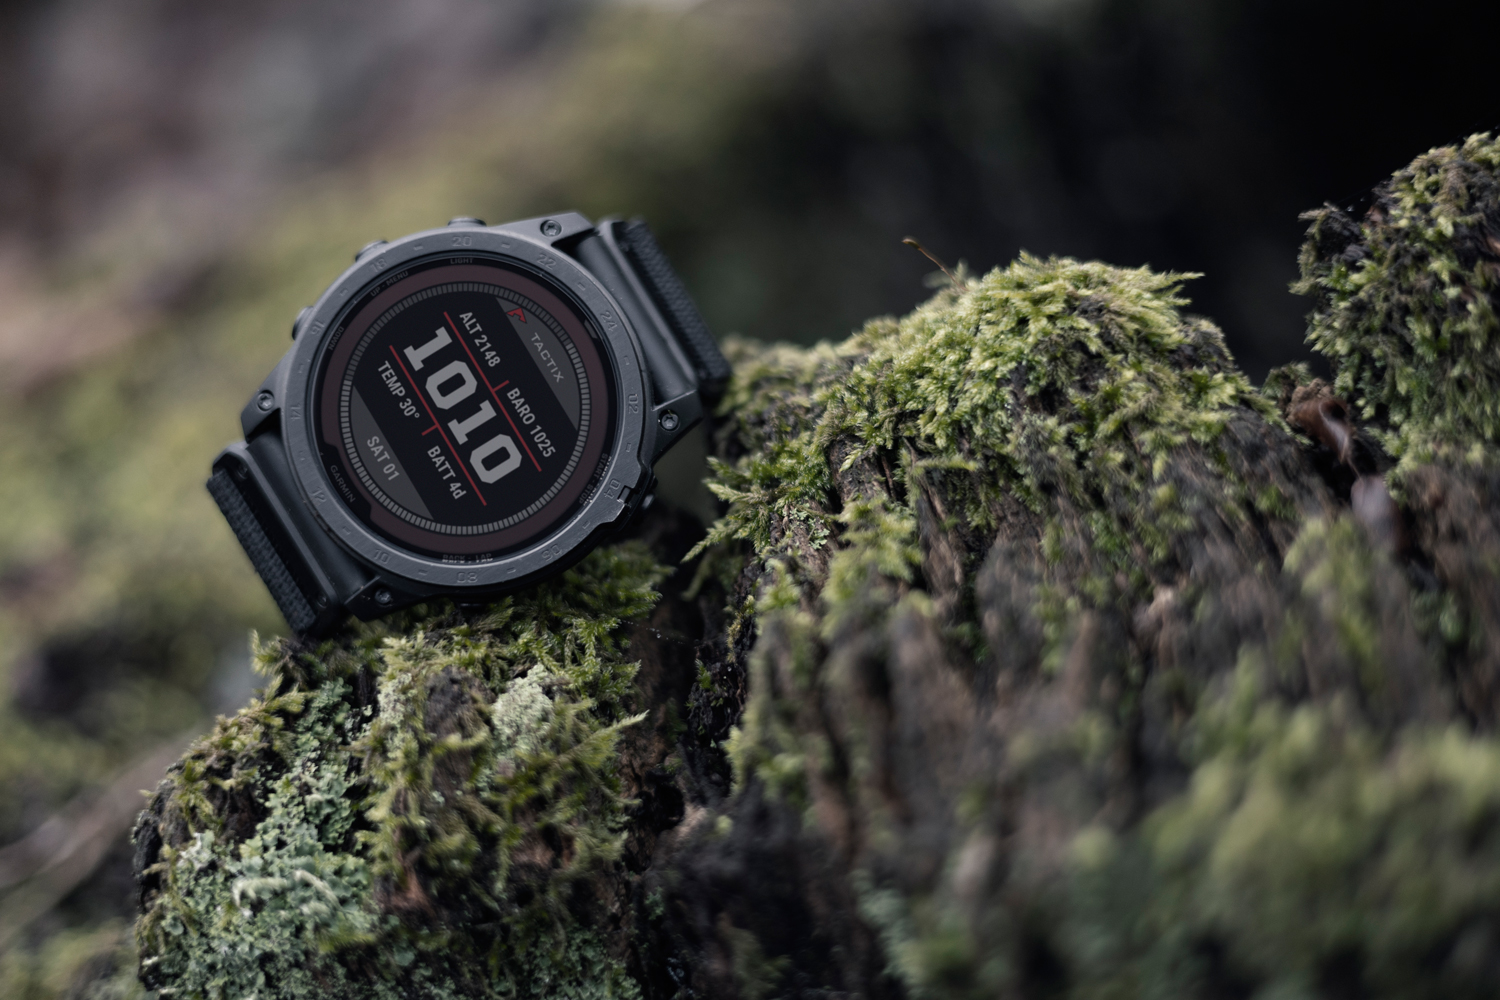 Stænke Port radikal Garmin tactix 7 series launched with several improvements from US$1,099.99  - NotebookCheck.net News